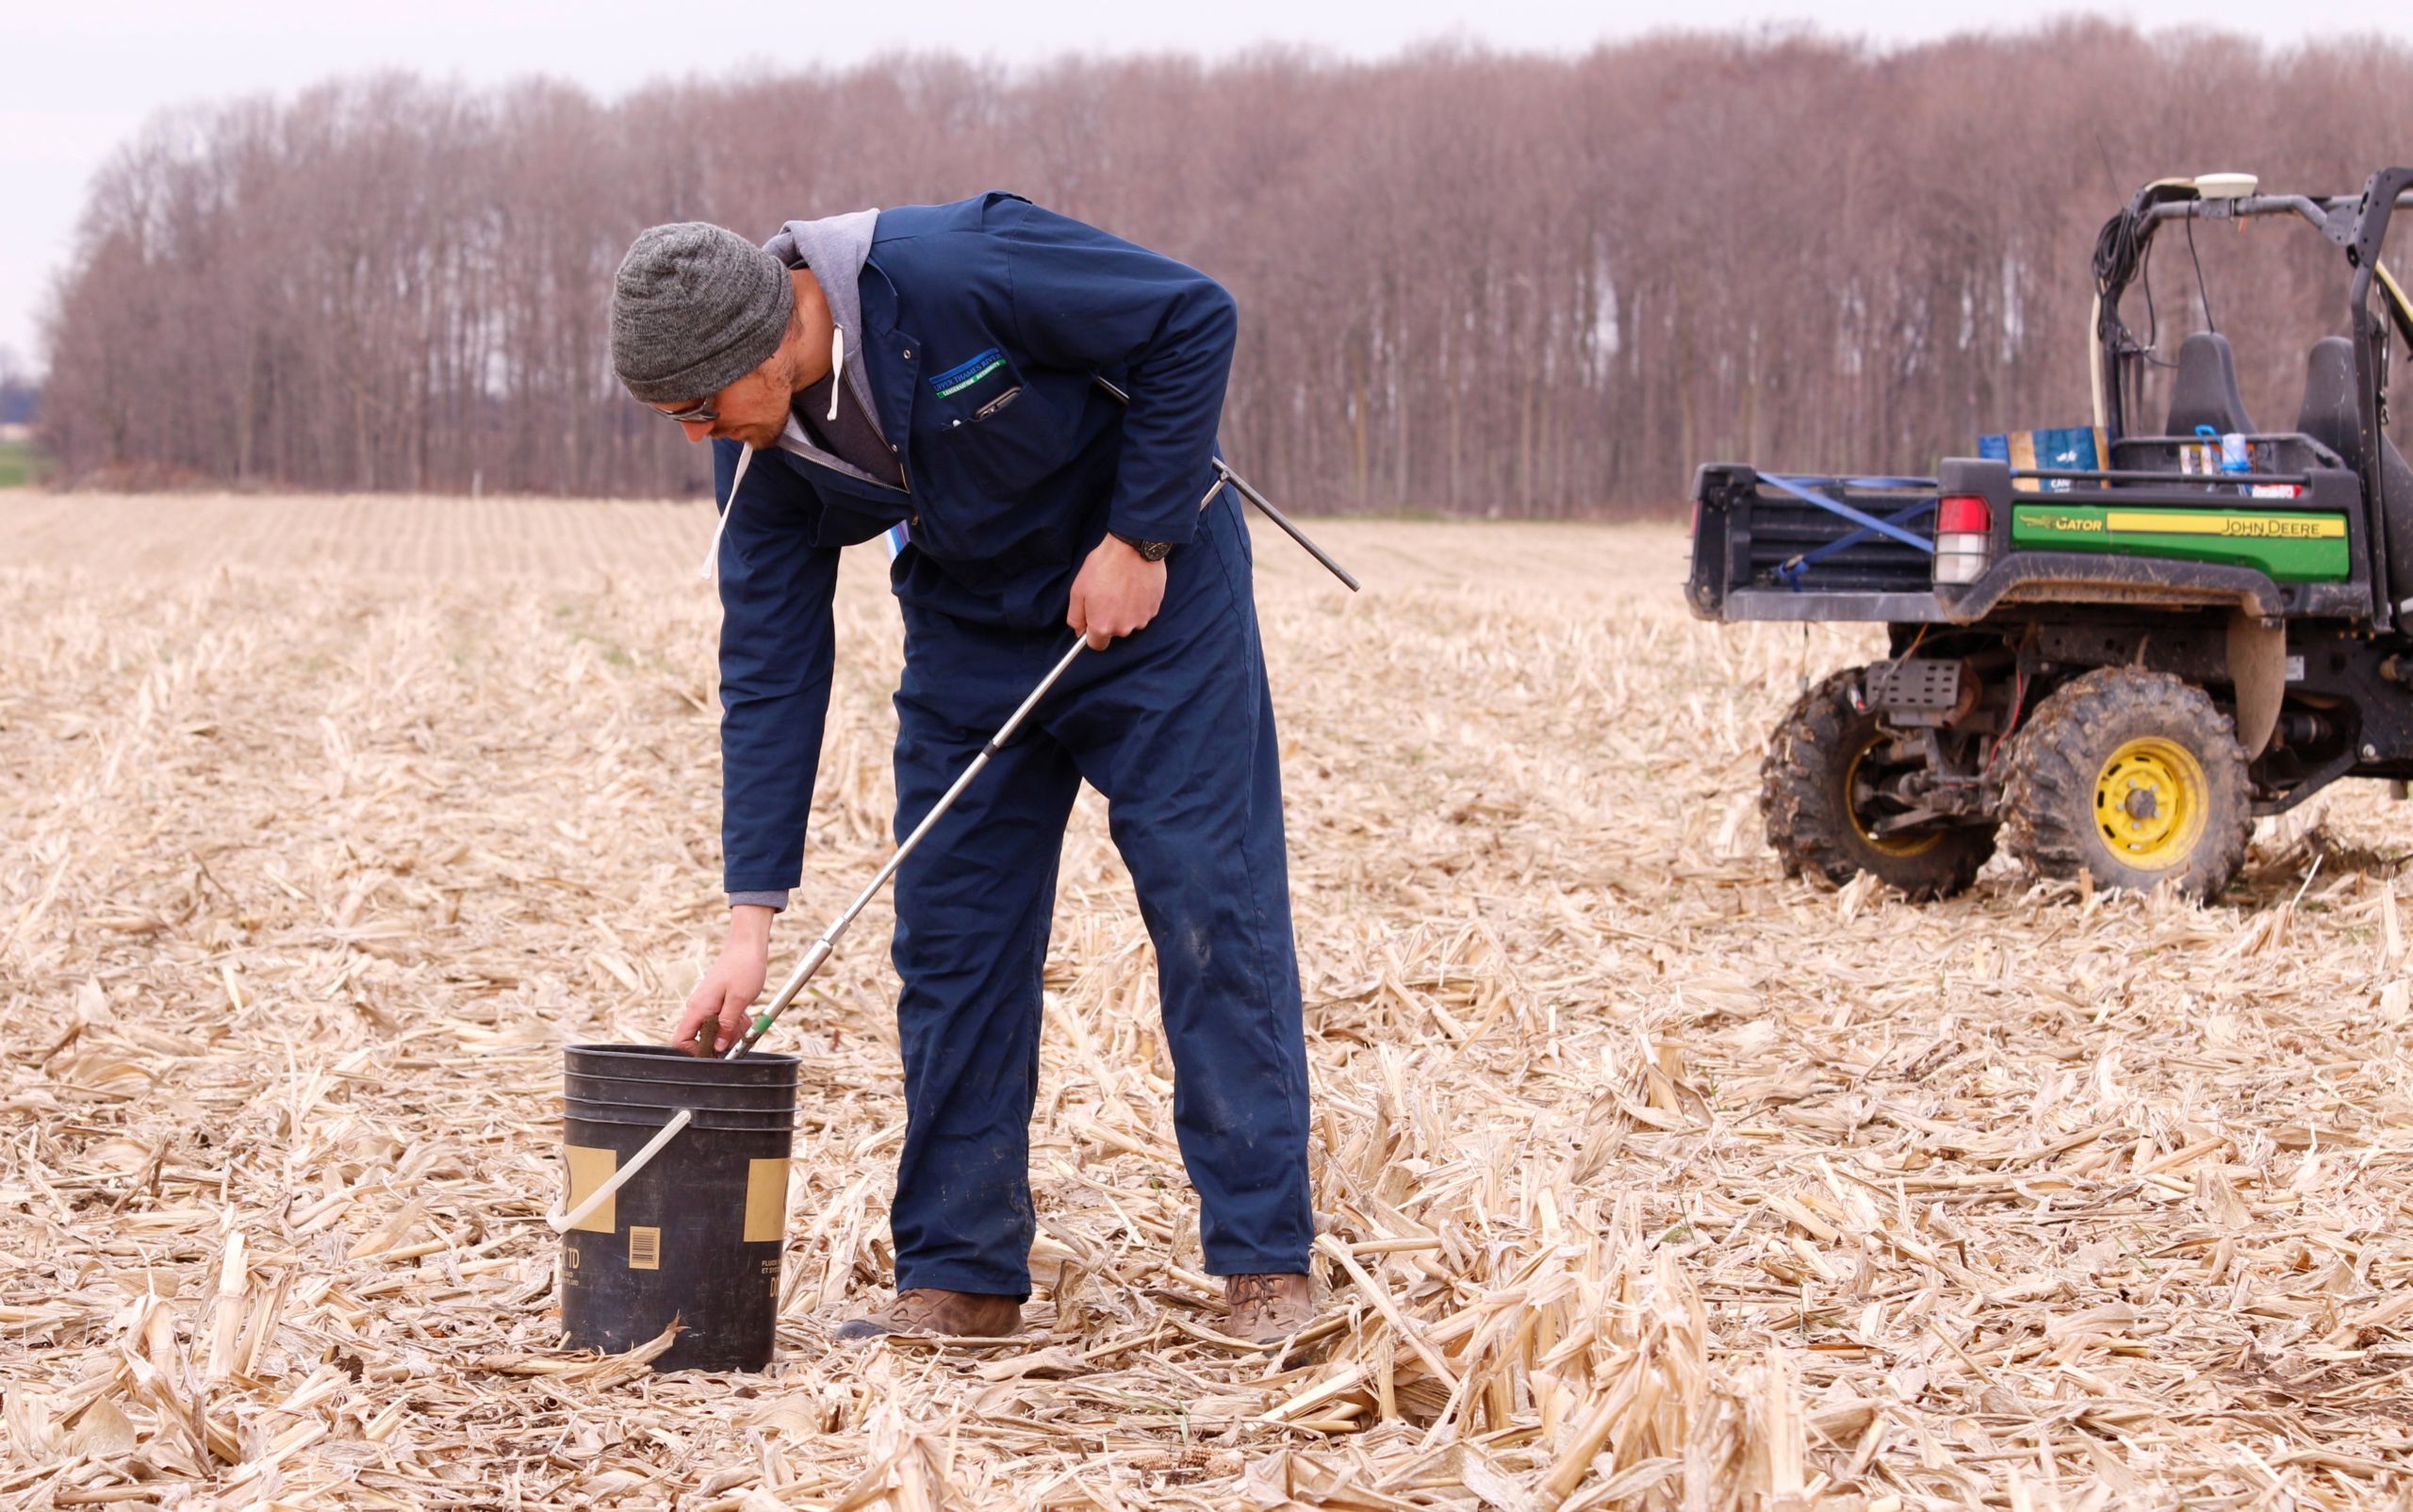 Person standing in corn stubble field, putting a soil sample into a bucket,near an all terrain vehicle